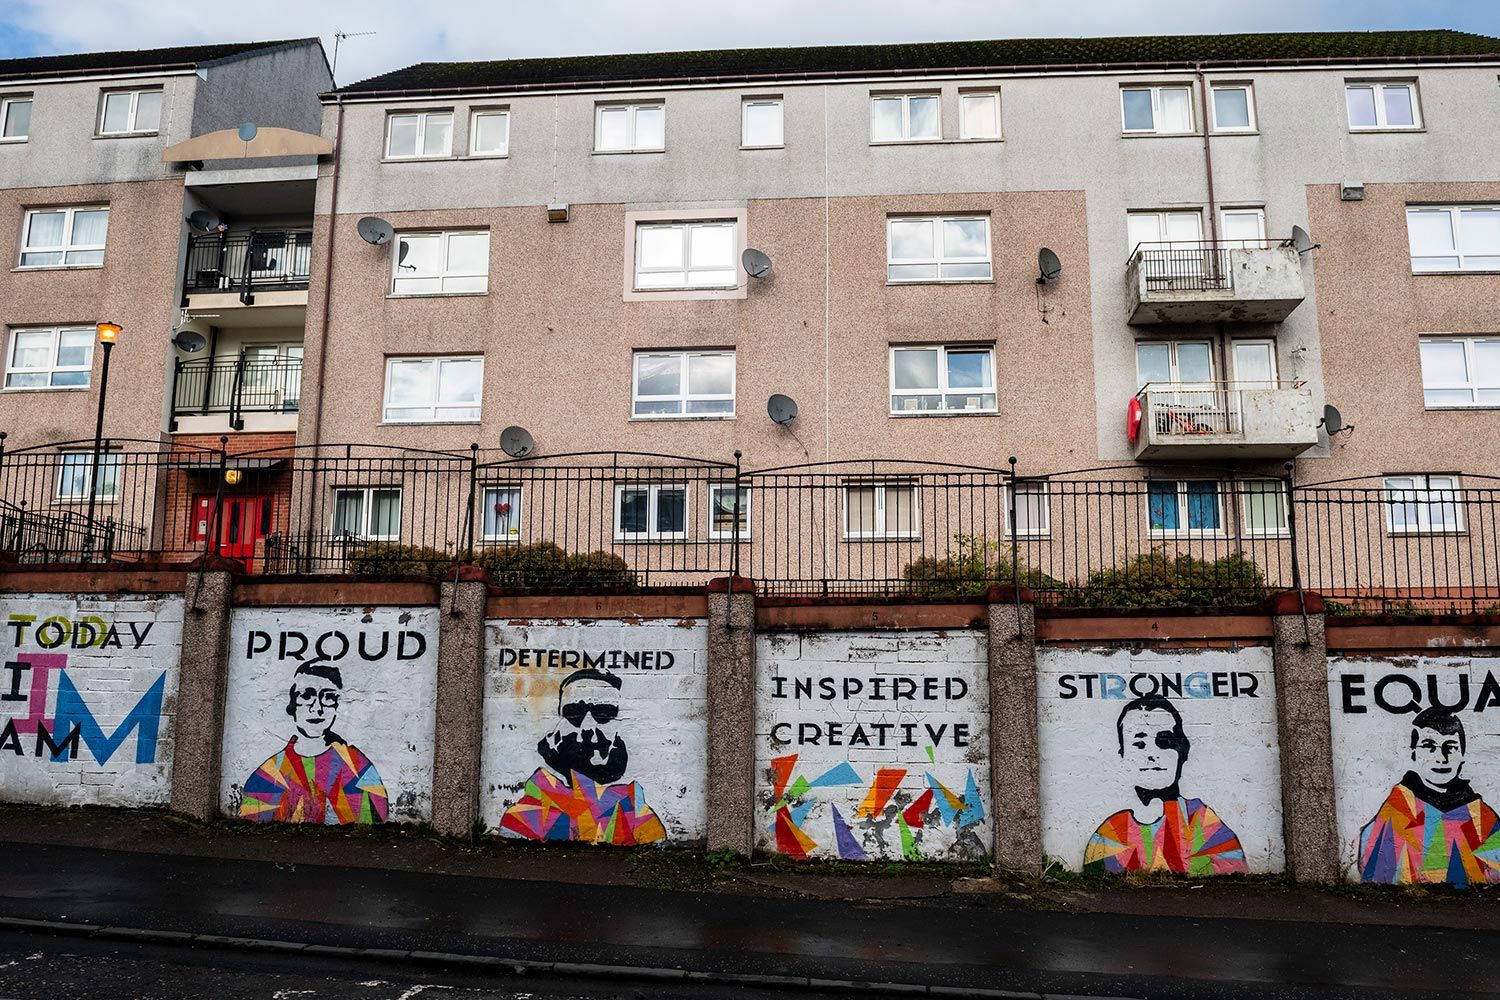 A mural painted by youth from Y Sort It, meant to inspire positivity in the neighborhood, on sealed-off garages, Clydebank. Image by Michael Santiago. United Kingdom, 2019.